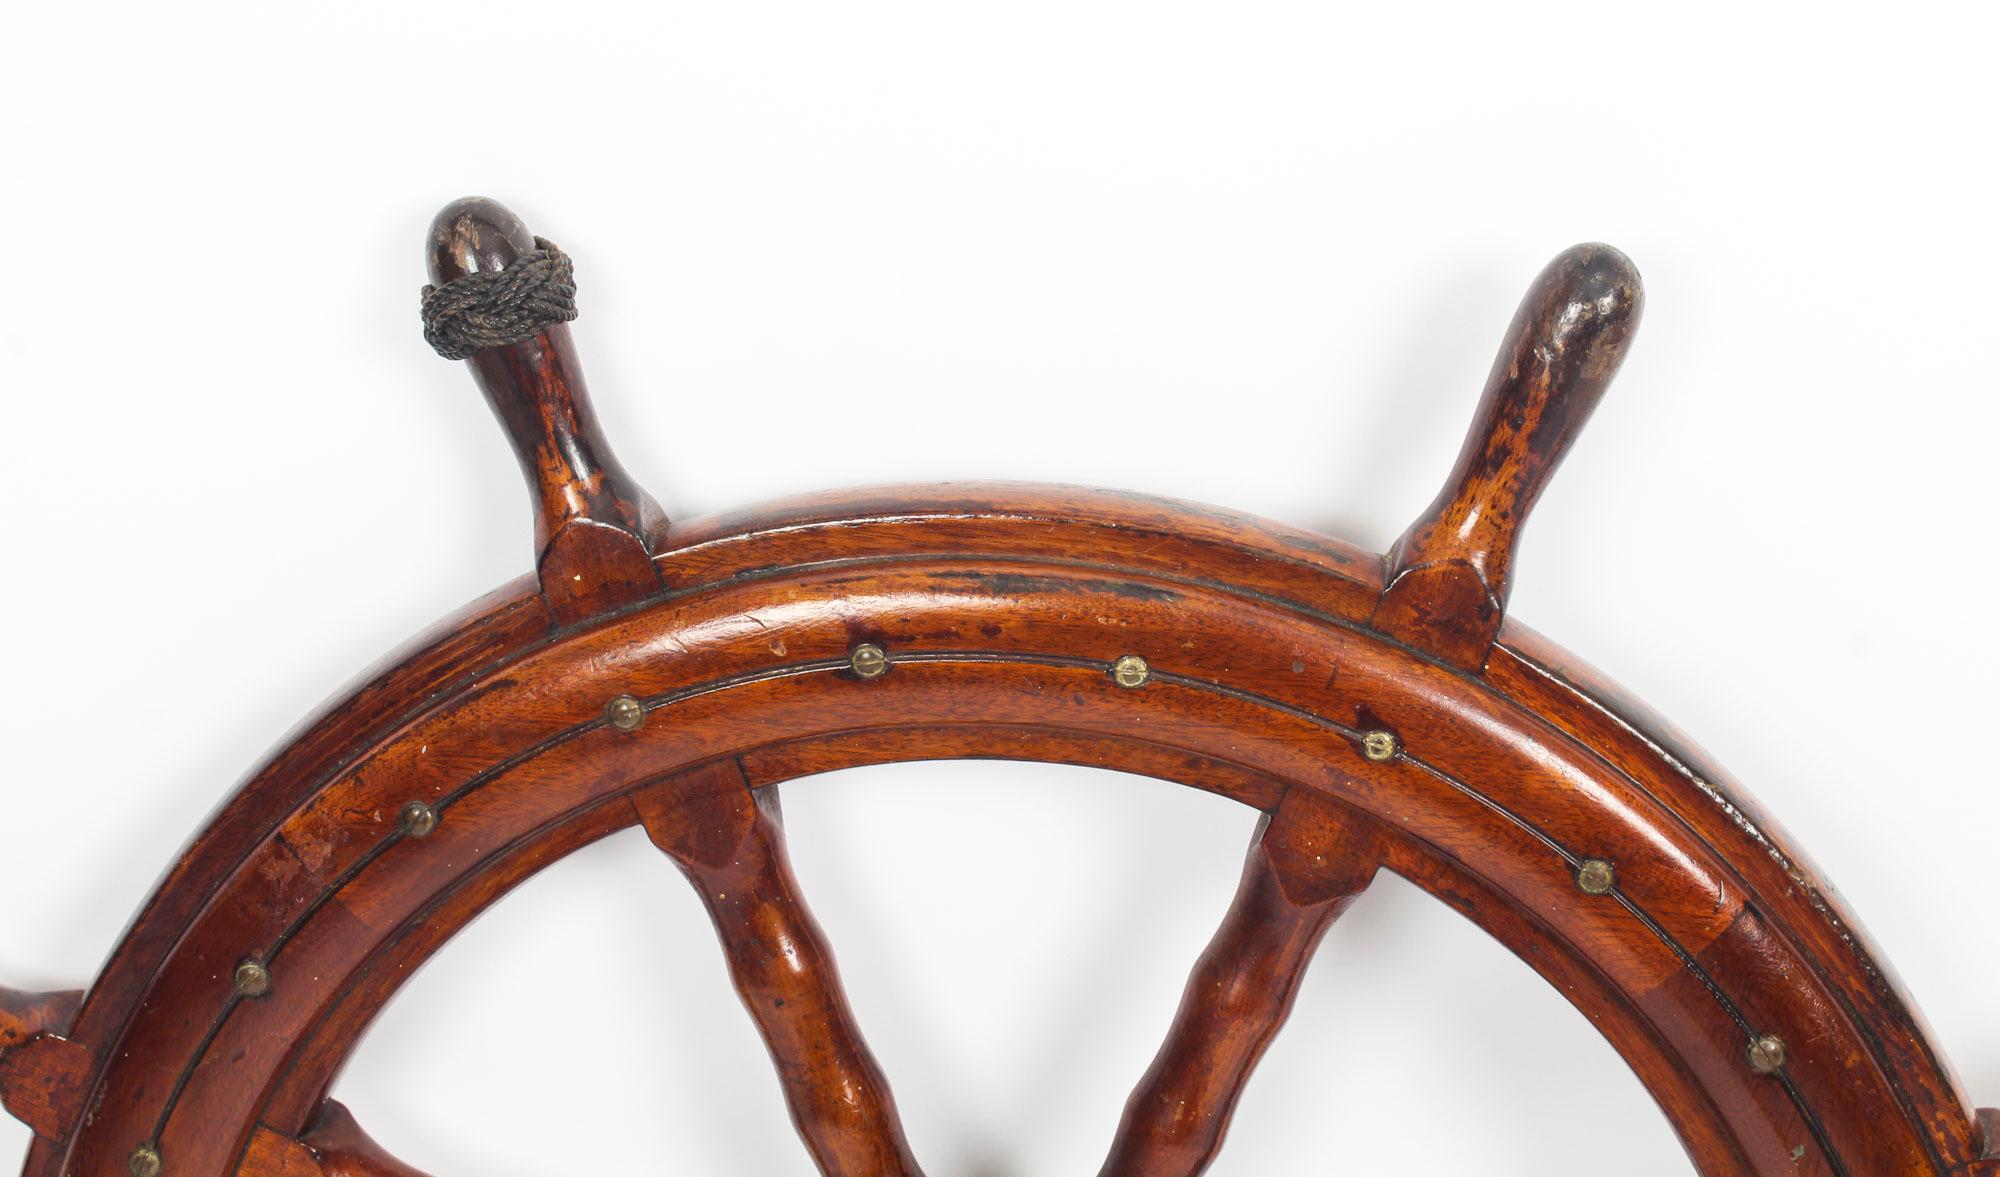 A superb antique 19th century mahogany and brass set ships wheel, eight turn spokes, with brass centre cap, in excellent original untouched condition.
 
Condition:
In excellent condition with only minor marks and wear commensurate with age,